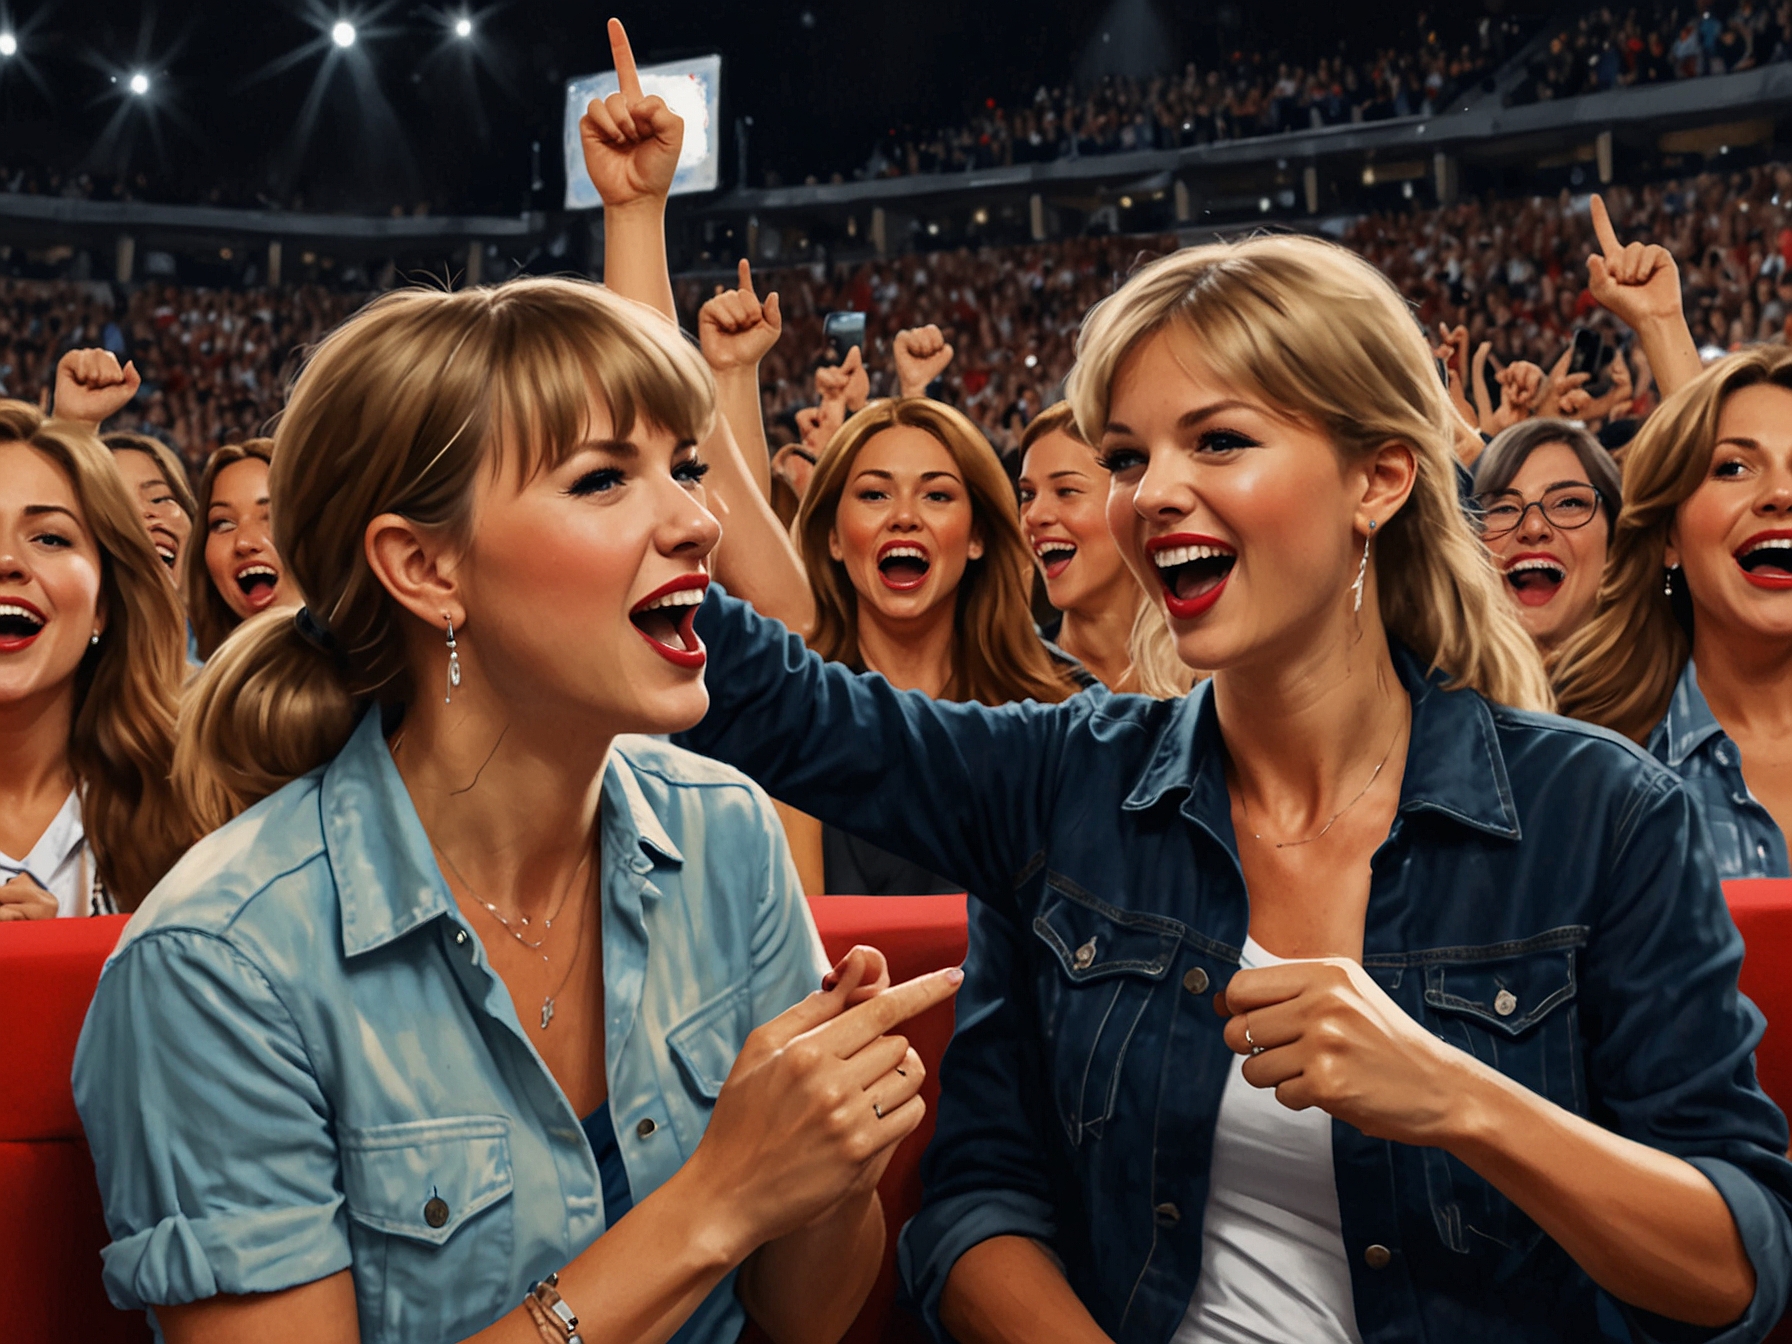 Donna Kelce enthusiastically cheering and showing support during Taylor Swift's concert, reflecting her approval of the unexpected collaboration between her son Travis and the pop star.